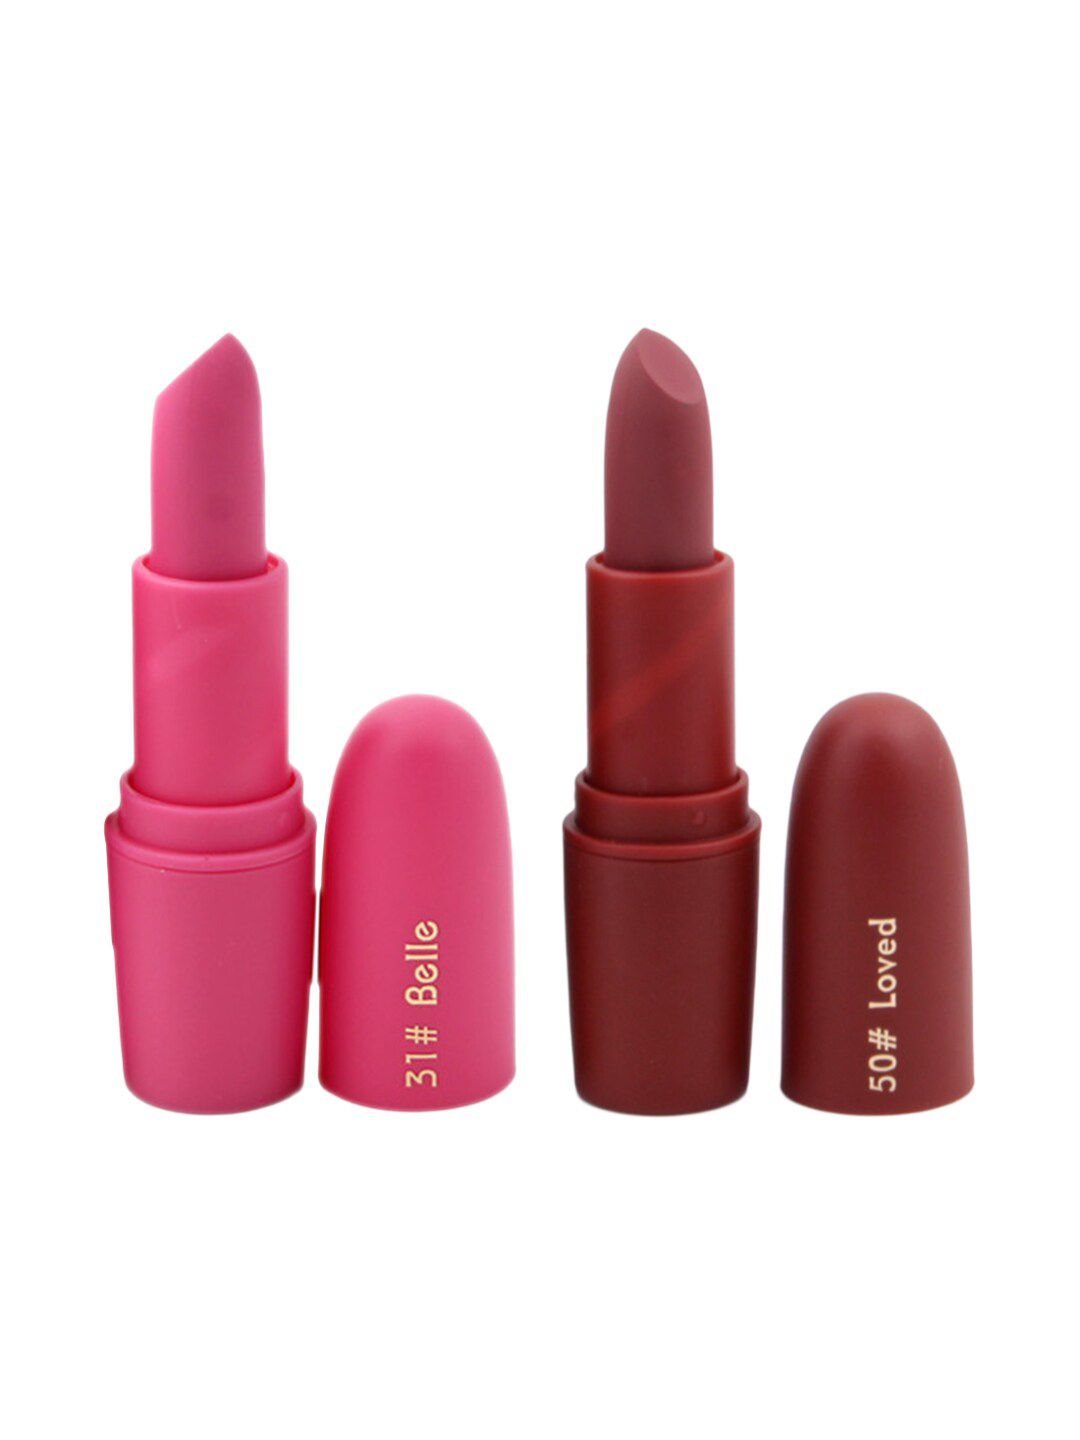 MISS ROSE Professional Make-Up Set of 2 Matte Creamy Lipsticks - Belle 31 & Loved 50 Price in India